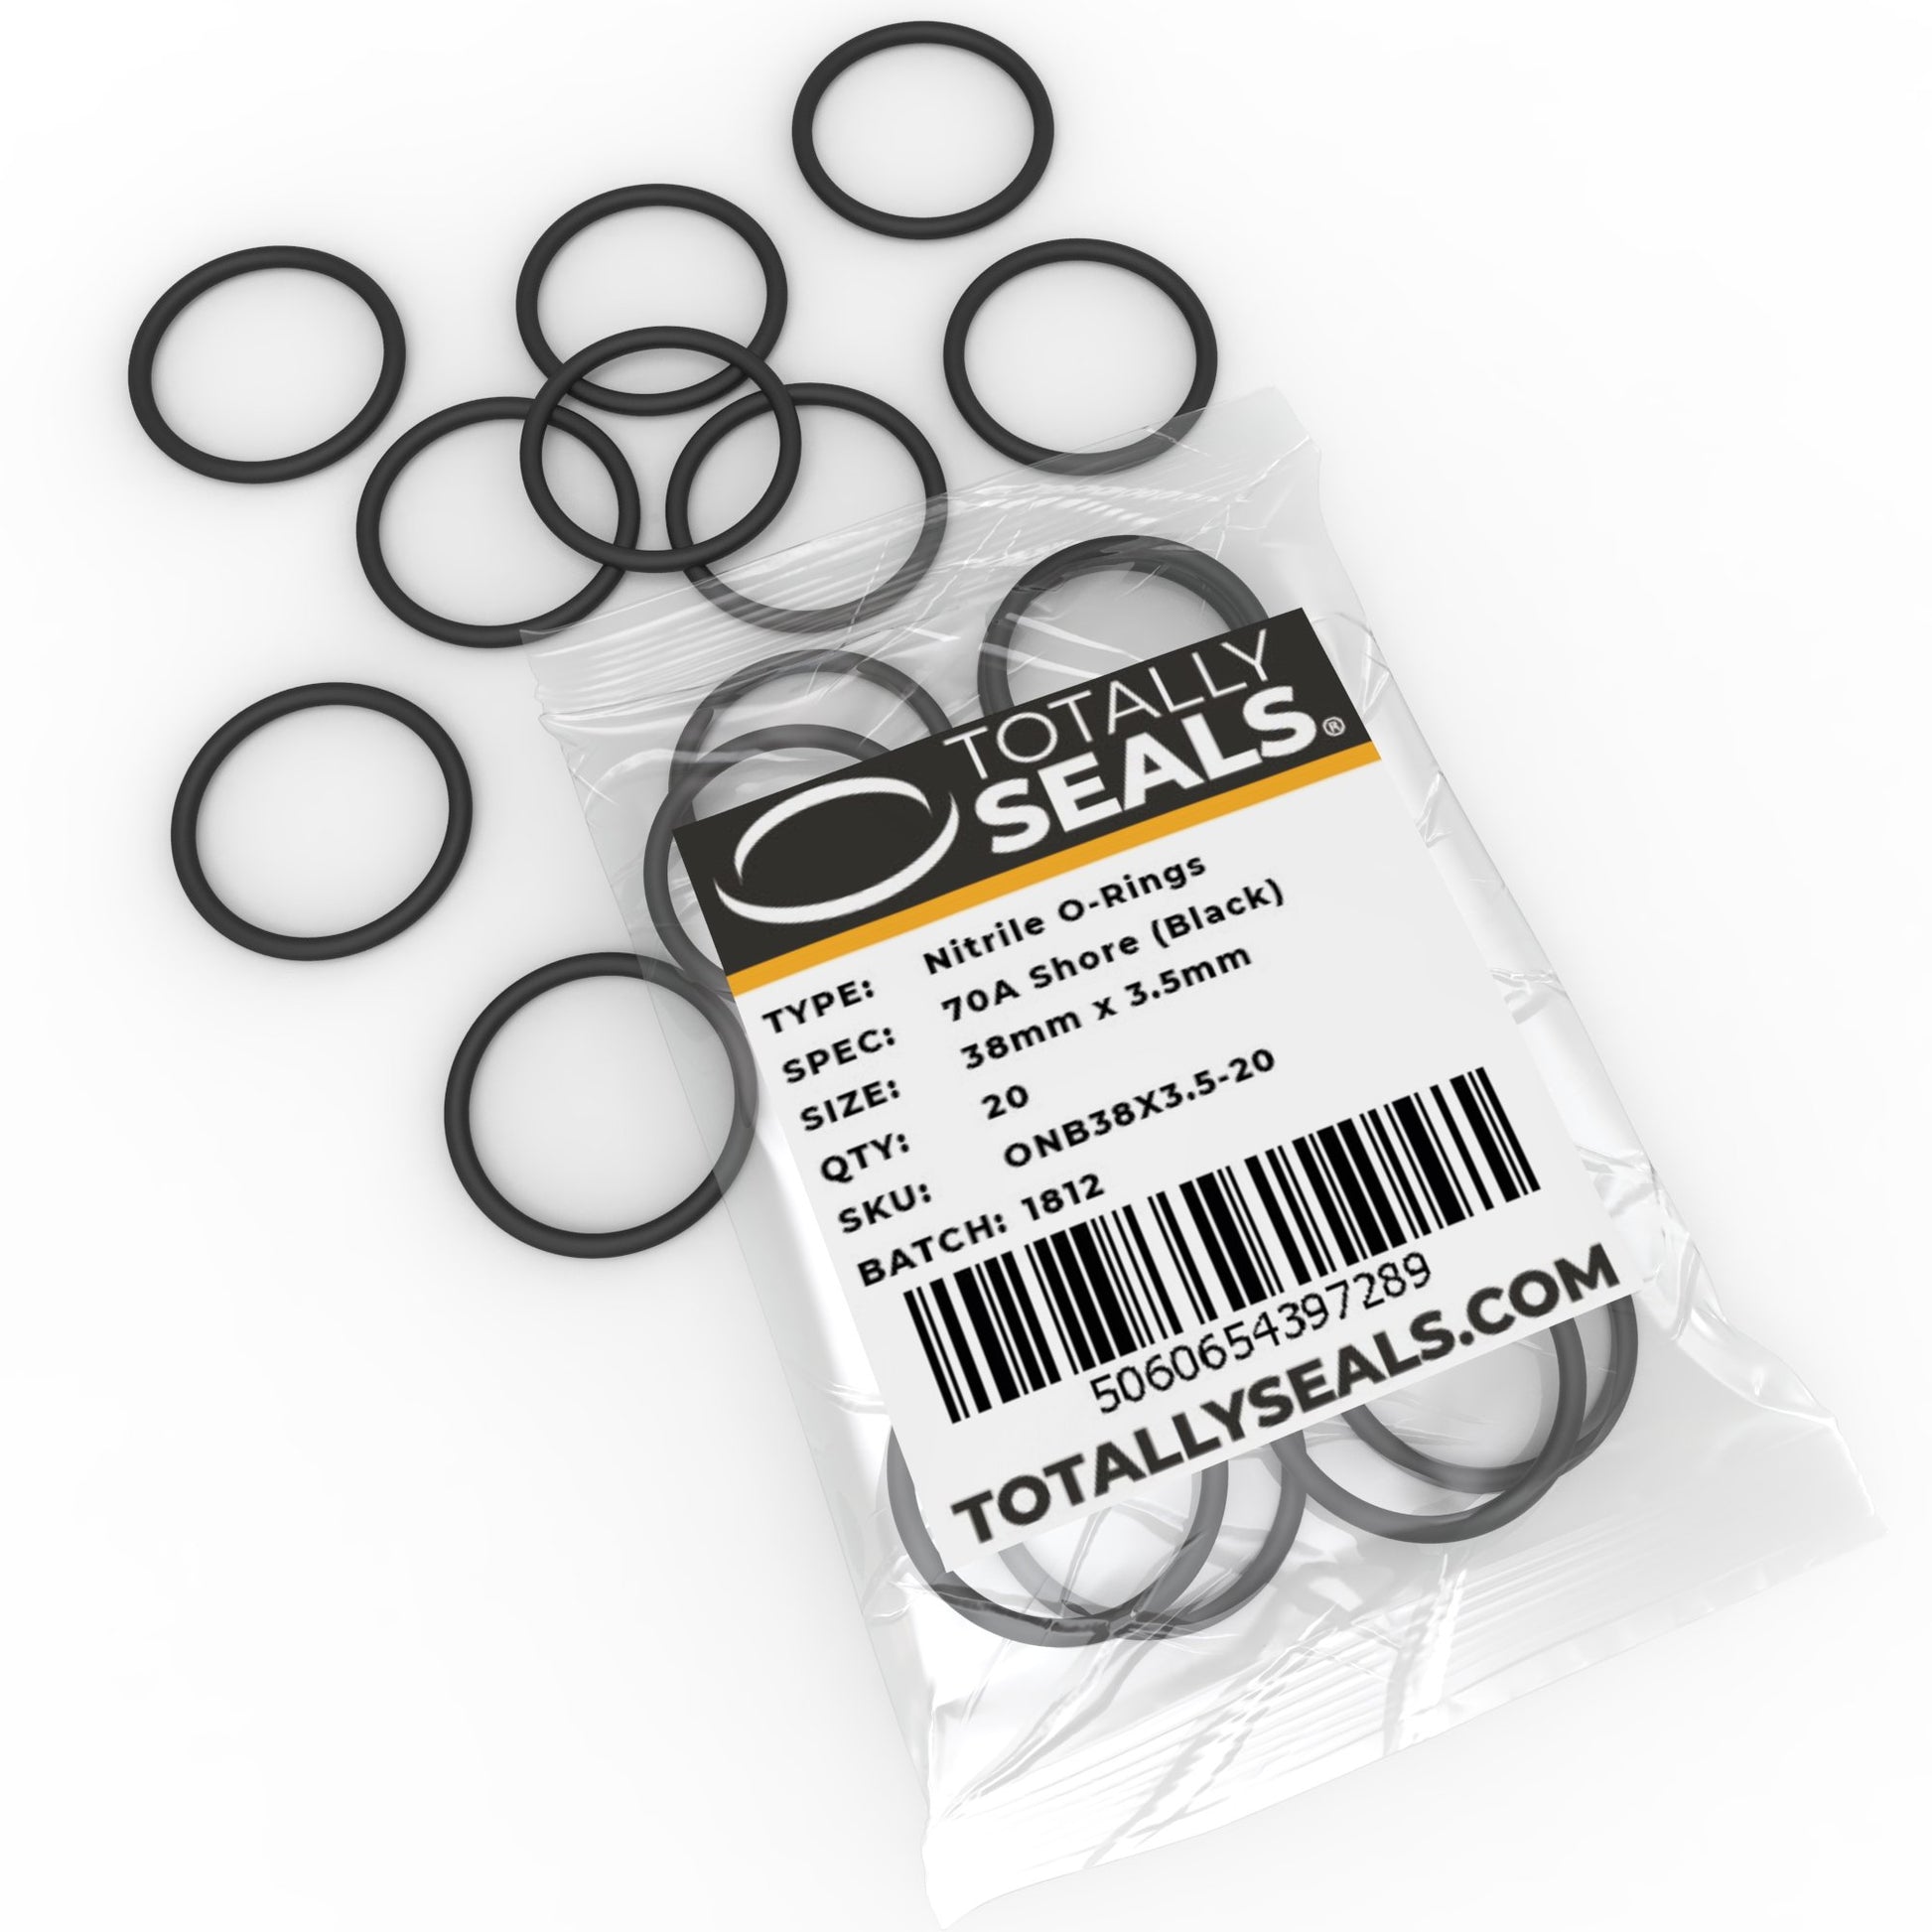 38mm x 3.5mm (45mm OD) Nitrile O-Rings - Totally Seals®